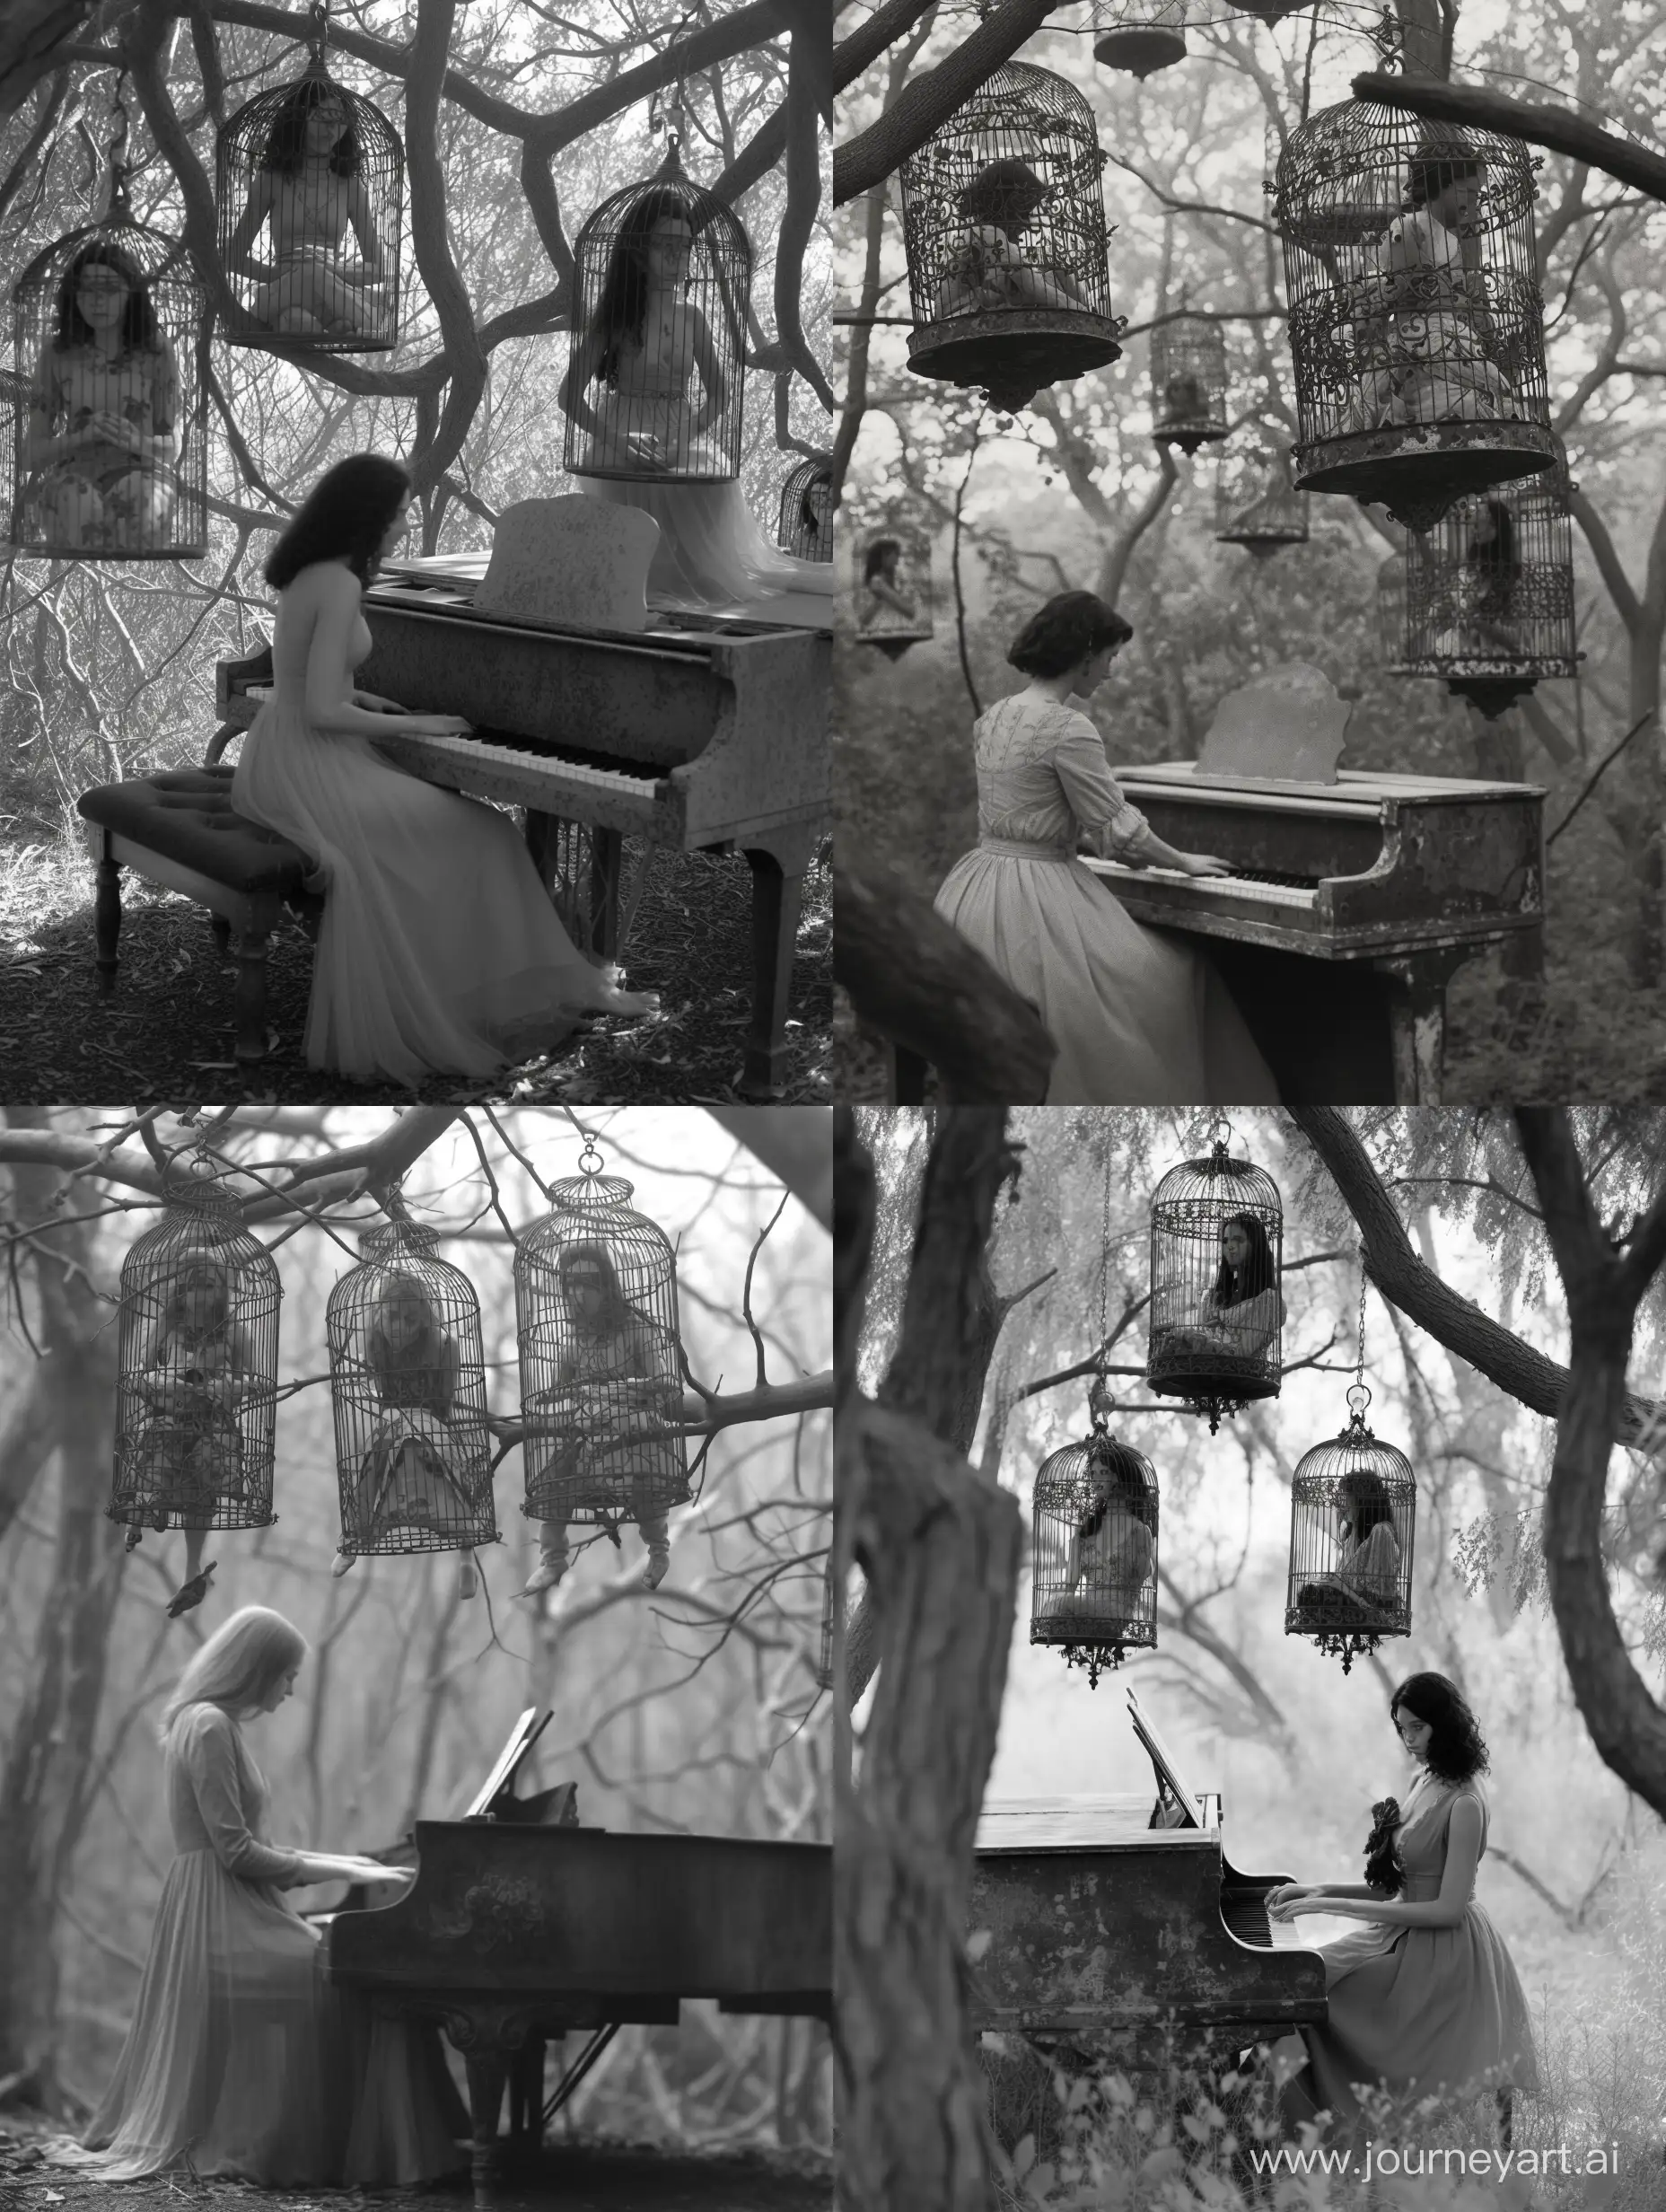 A grayscale photo of a woman, dressed in a vintage gown,
sits at a weathered piano amidst the enchanting woods.

The melodies she plays echo through the trees,
as if nature itself is entranced by her music.

In the branches above, two or three antique bird cages hang,
their intricate designs and rusted chains adding an eerie touch.

Inside each cage, a woman sits comfortably,
her whole body contained within the confines of the cage,
watching the pianist with a mixture of curiosity and melancholy.

The women in the cages are ethereal beings,
their presence evoking a sense of mystery and enchantment.

As the music fills the air, the women in the cages sway,
their movements synchronized with the haunting melody,
creating a mesmerizing dance that transcends the boundaries of the physical world.

Through this image, the viewer is transported to a realm where music, nature, and captivity intertwine, blurring the lines between freedom and confinement.

Camera settings:
Camera Model: Nikon D850
Film Type: Kodak Portra 400
Lens: 50mm prime lens
Techniques: Utilize shallow depth of field to focus on the woman at the piano, while creating a dreamy, blurred effect on the women in the cages.

Unlikely collaborators:
Directors: Guillermo del Toro, Sofia Coppola, Alejandro Jodorowsky
Cinematographers: Roger Deakins, Emmanuel Lubezki, Seamus McGarvey
Photographers: Tim Walker, Sarah Moon, Francesca Woodman
Fashion Designers: Alexander McQueen, Vivienne Westwood, Iris van Herpen